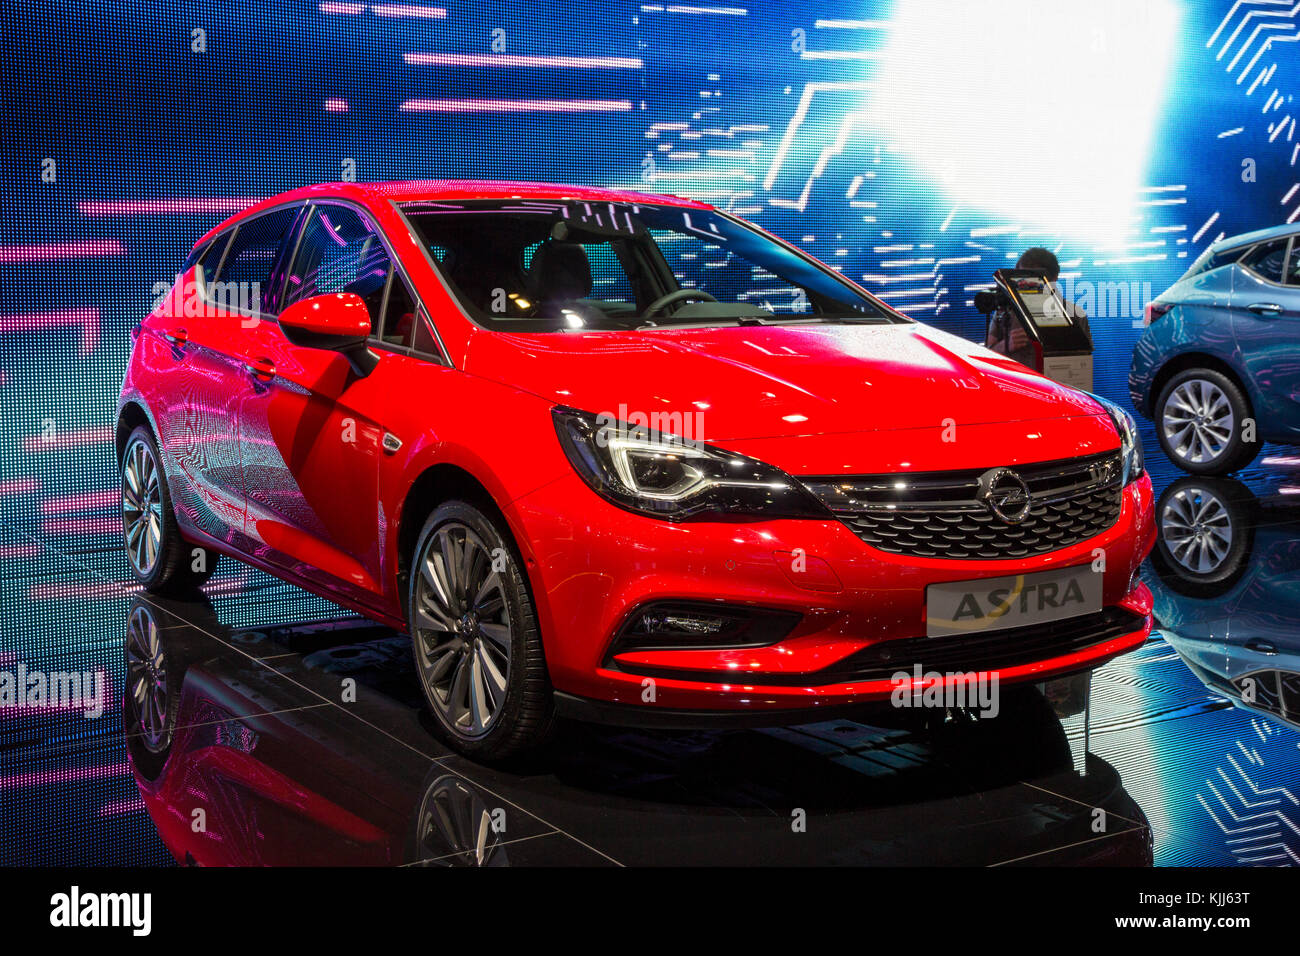 BRUSSELS - JAN 12, 2016: Opel Astra car showcased at the Brussels Motor Show. Stock Photo